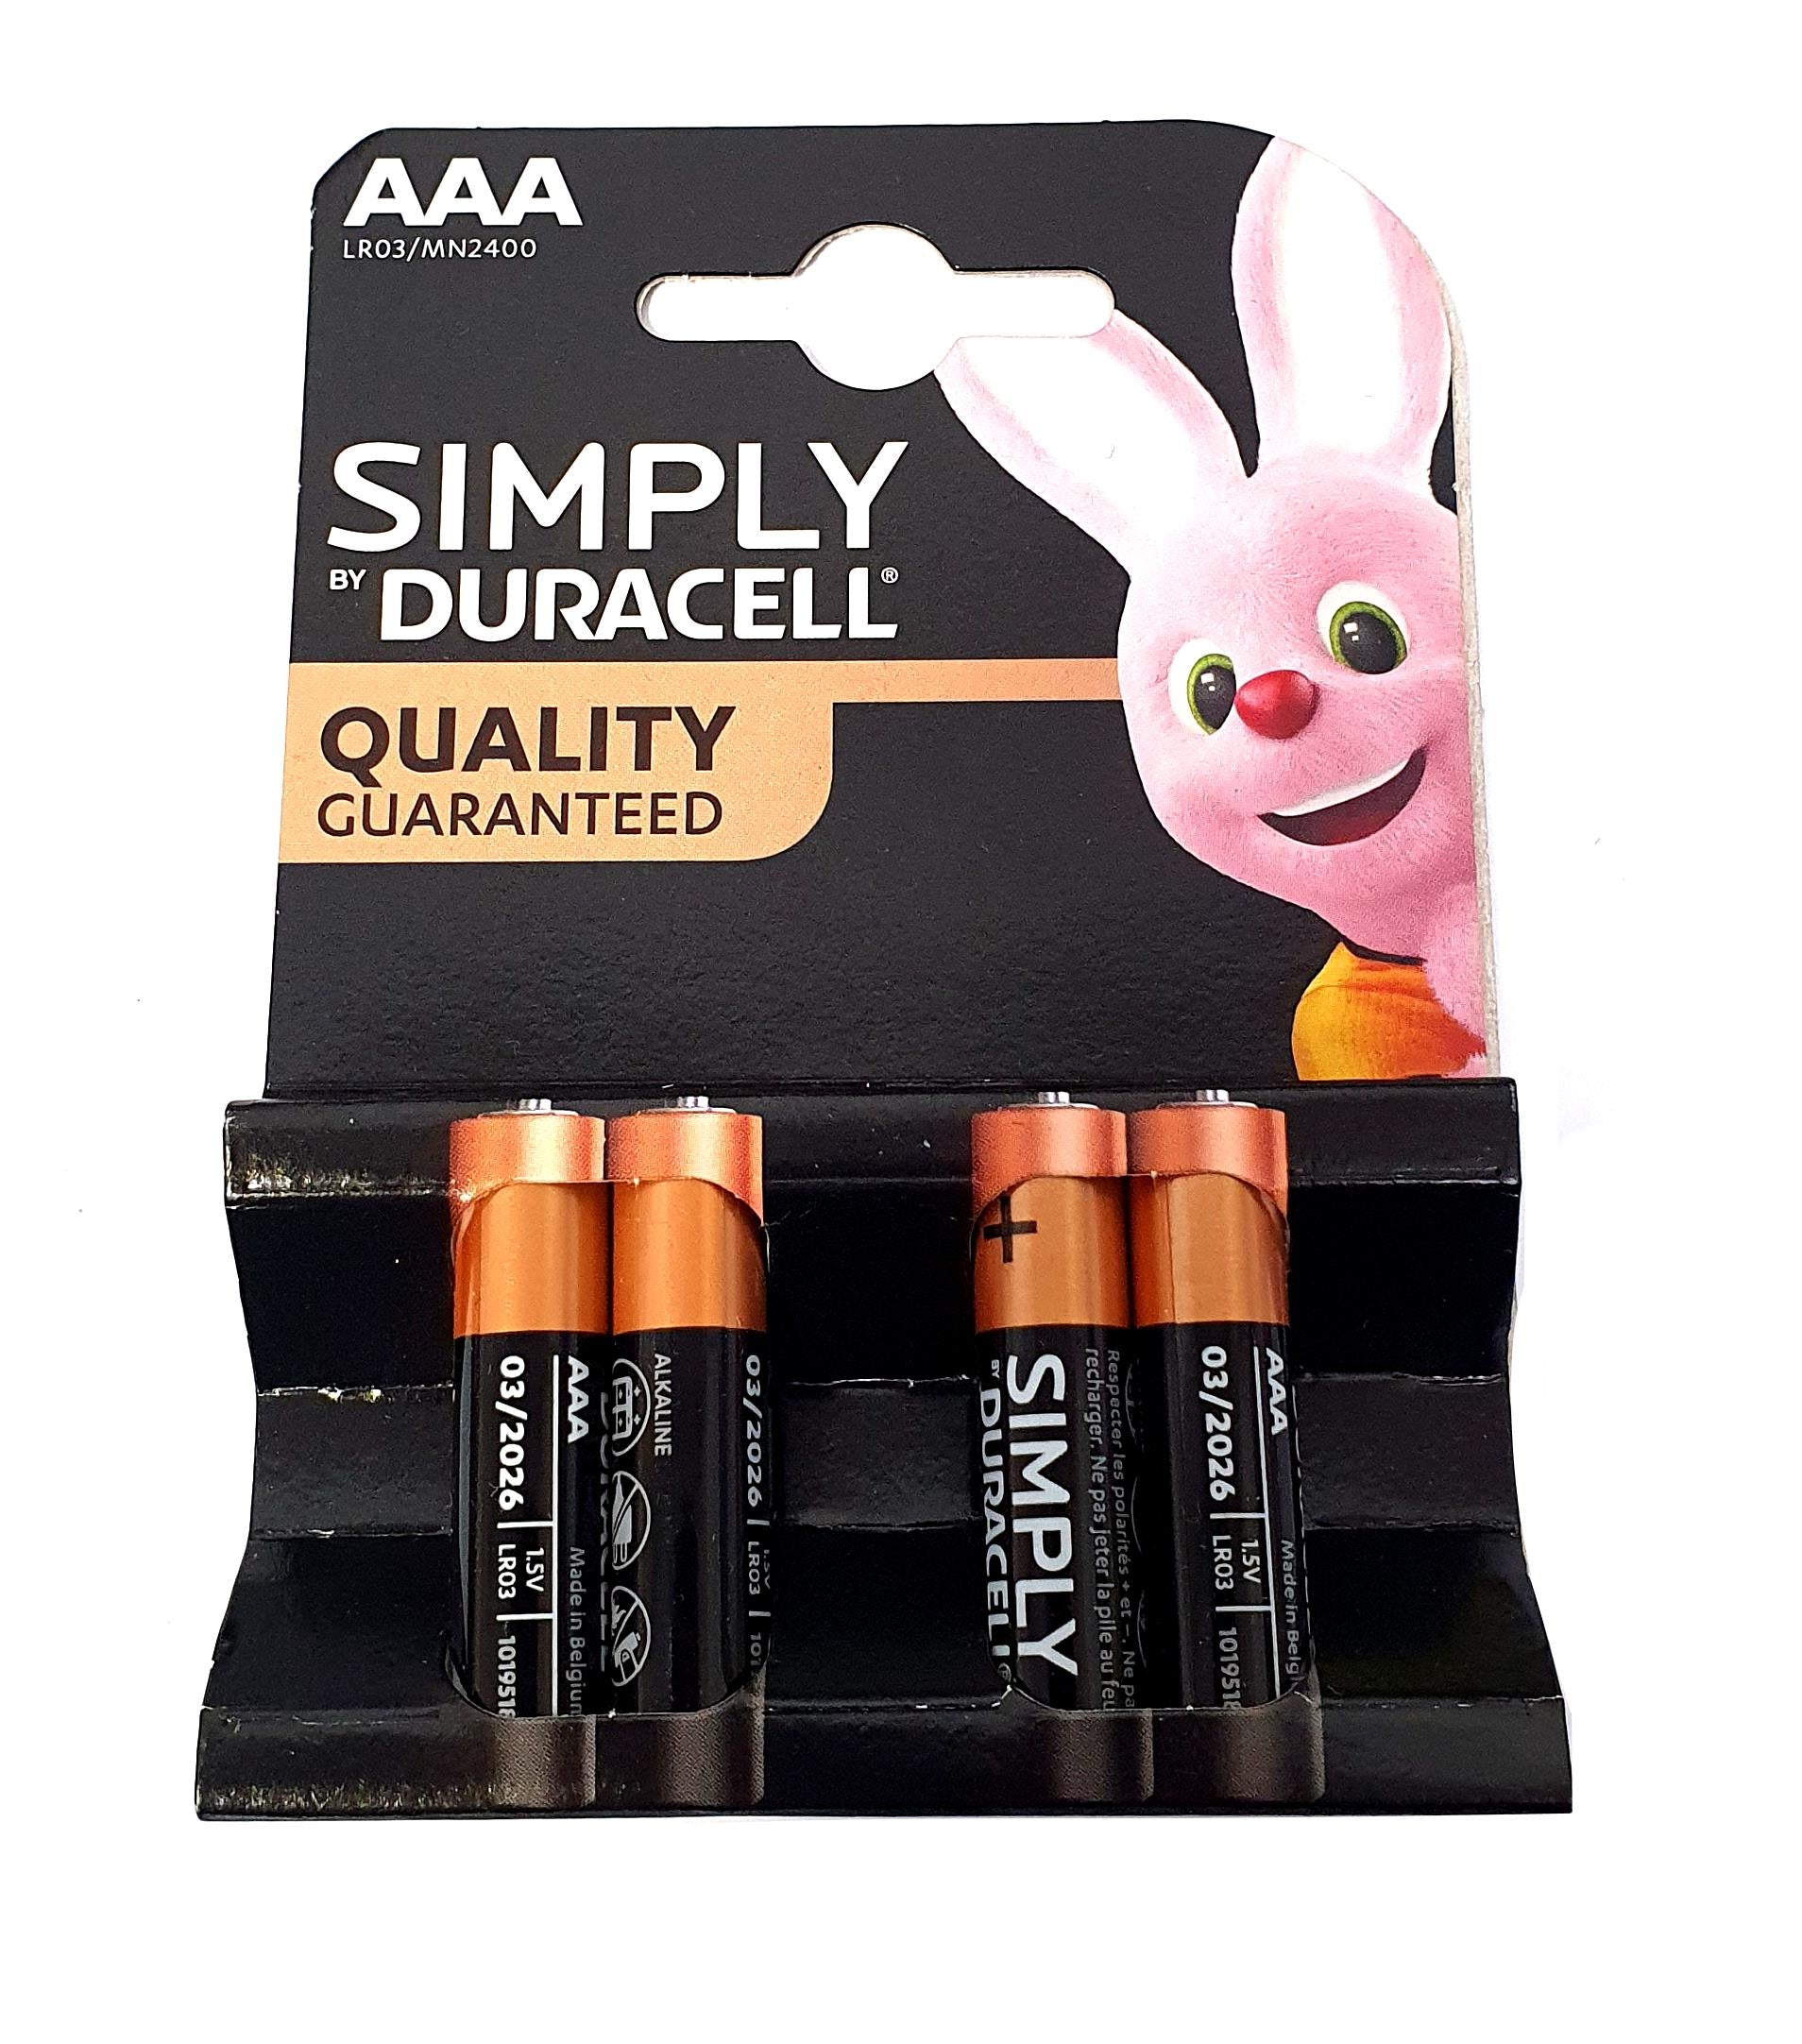 Duracell AAA Simply Duracell Battery